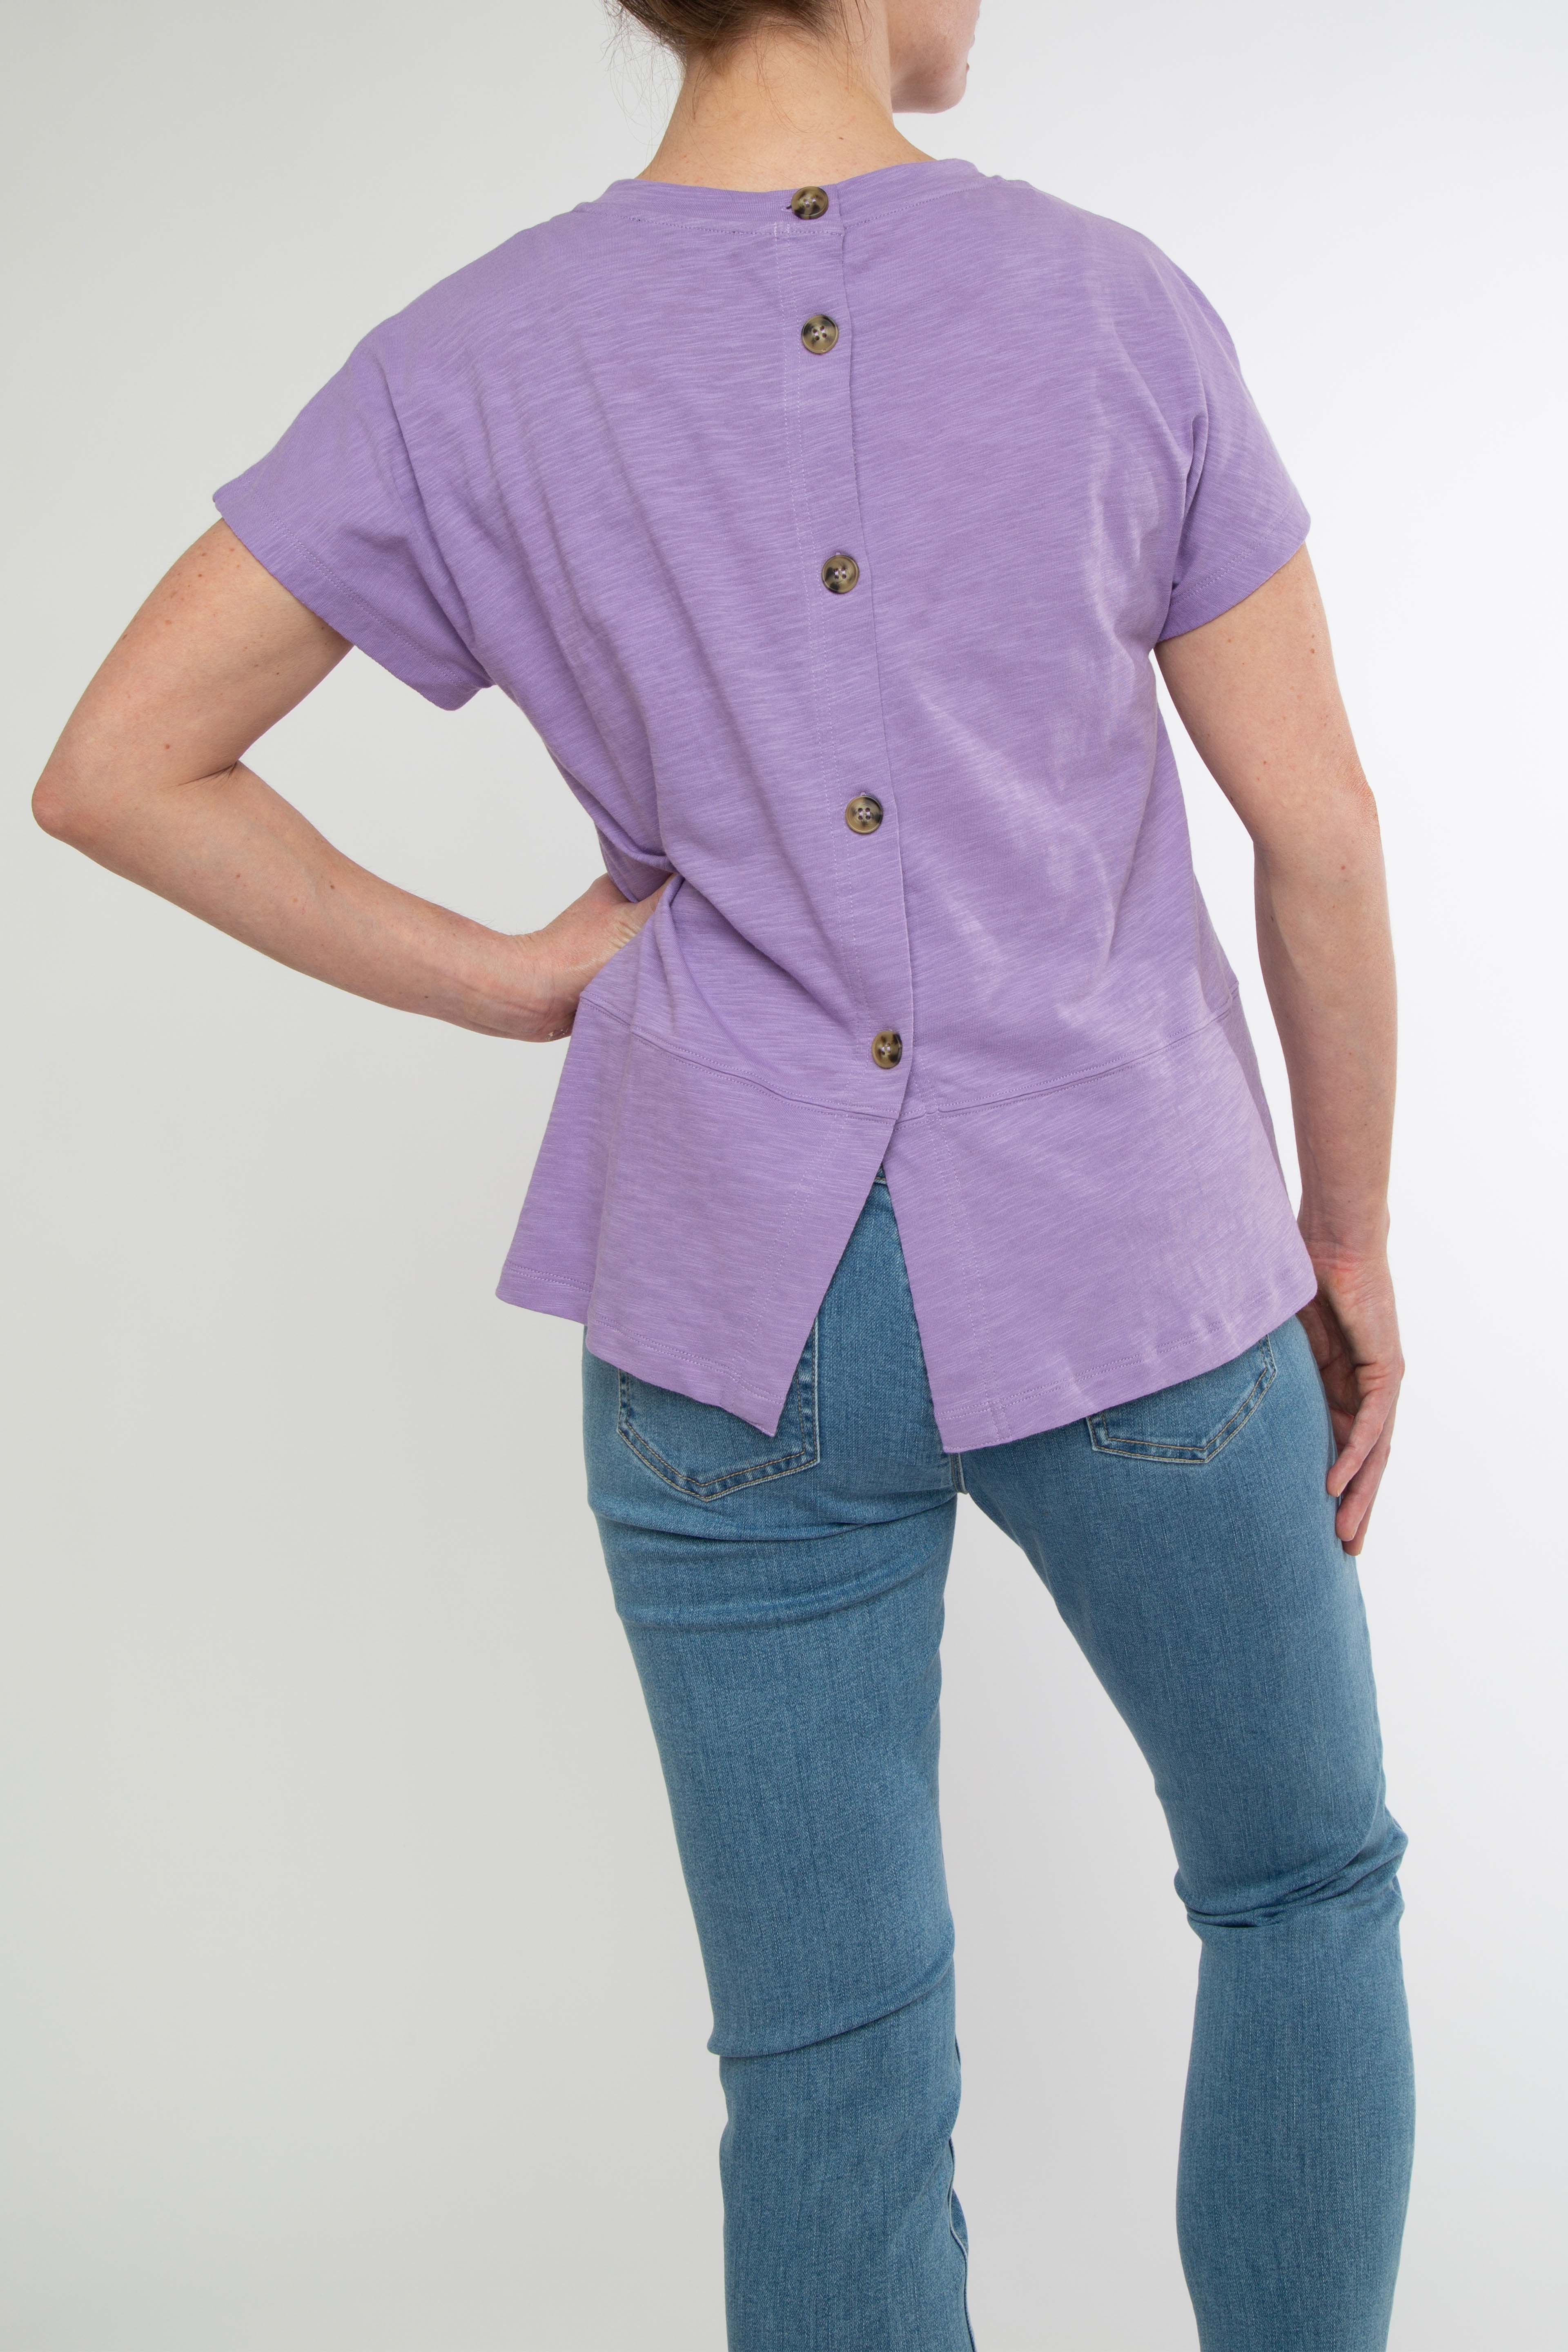 PING PONG BUTTON BACK TEE - WISTERIA